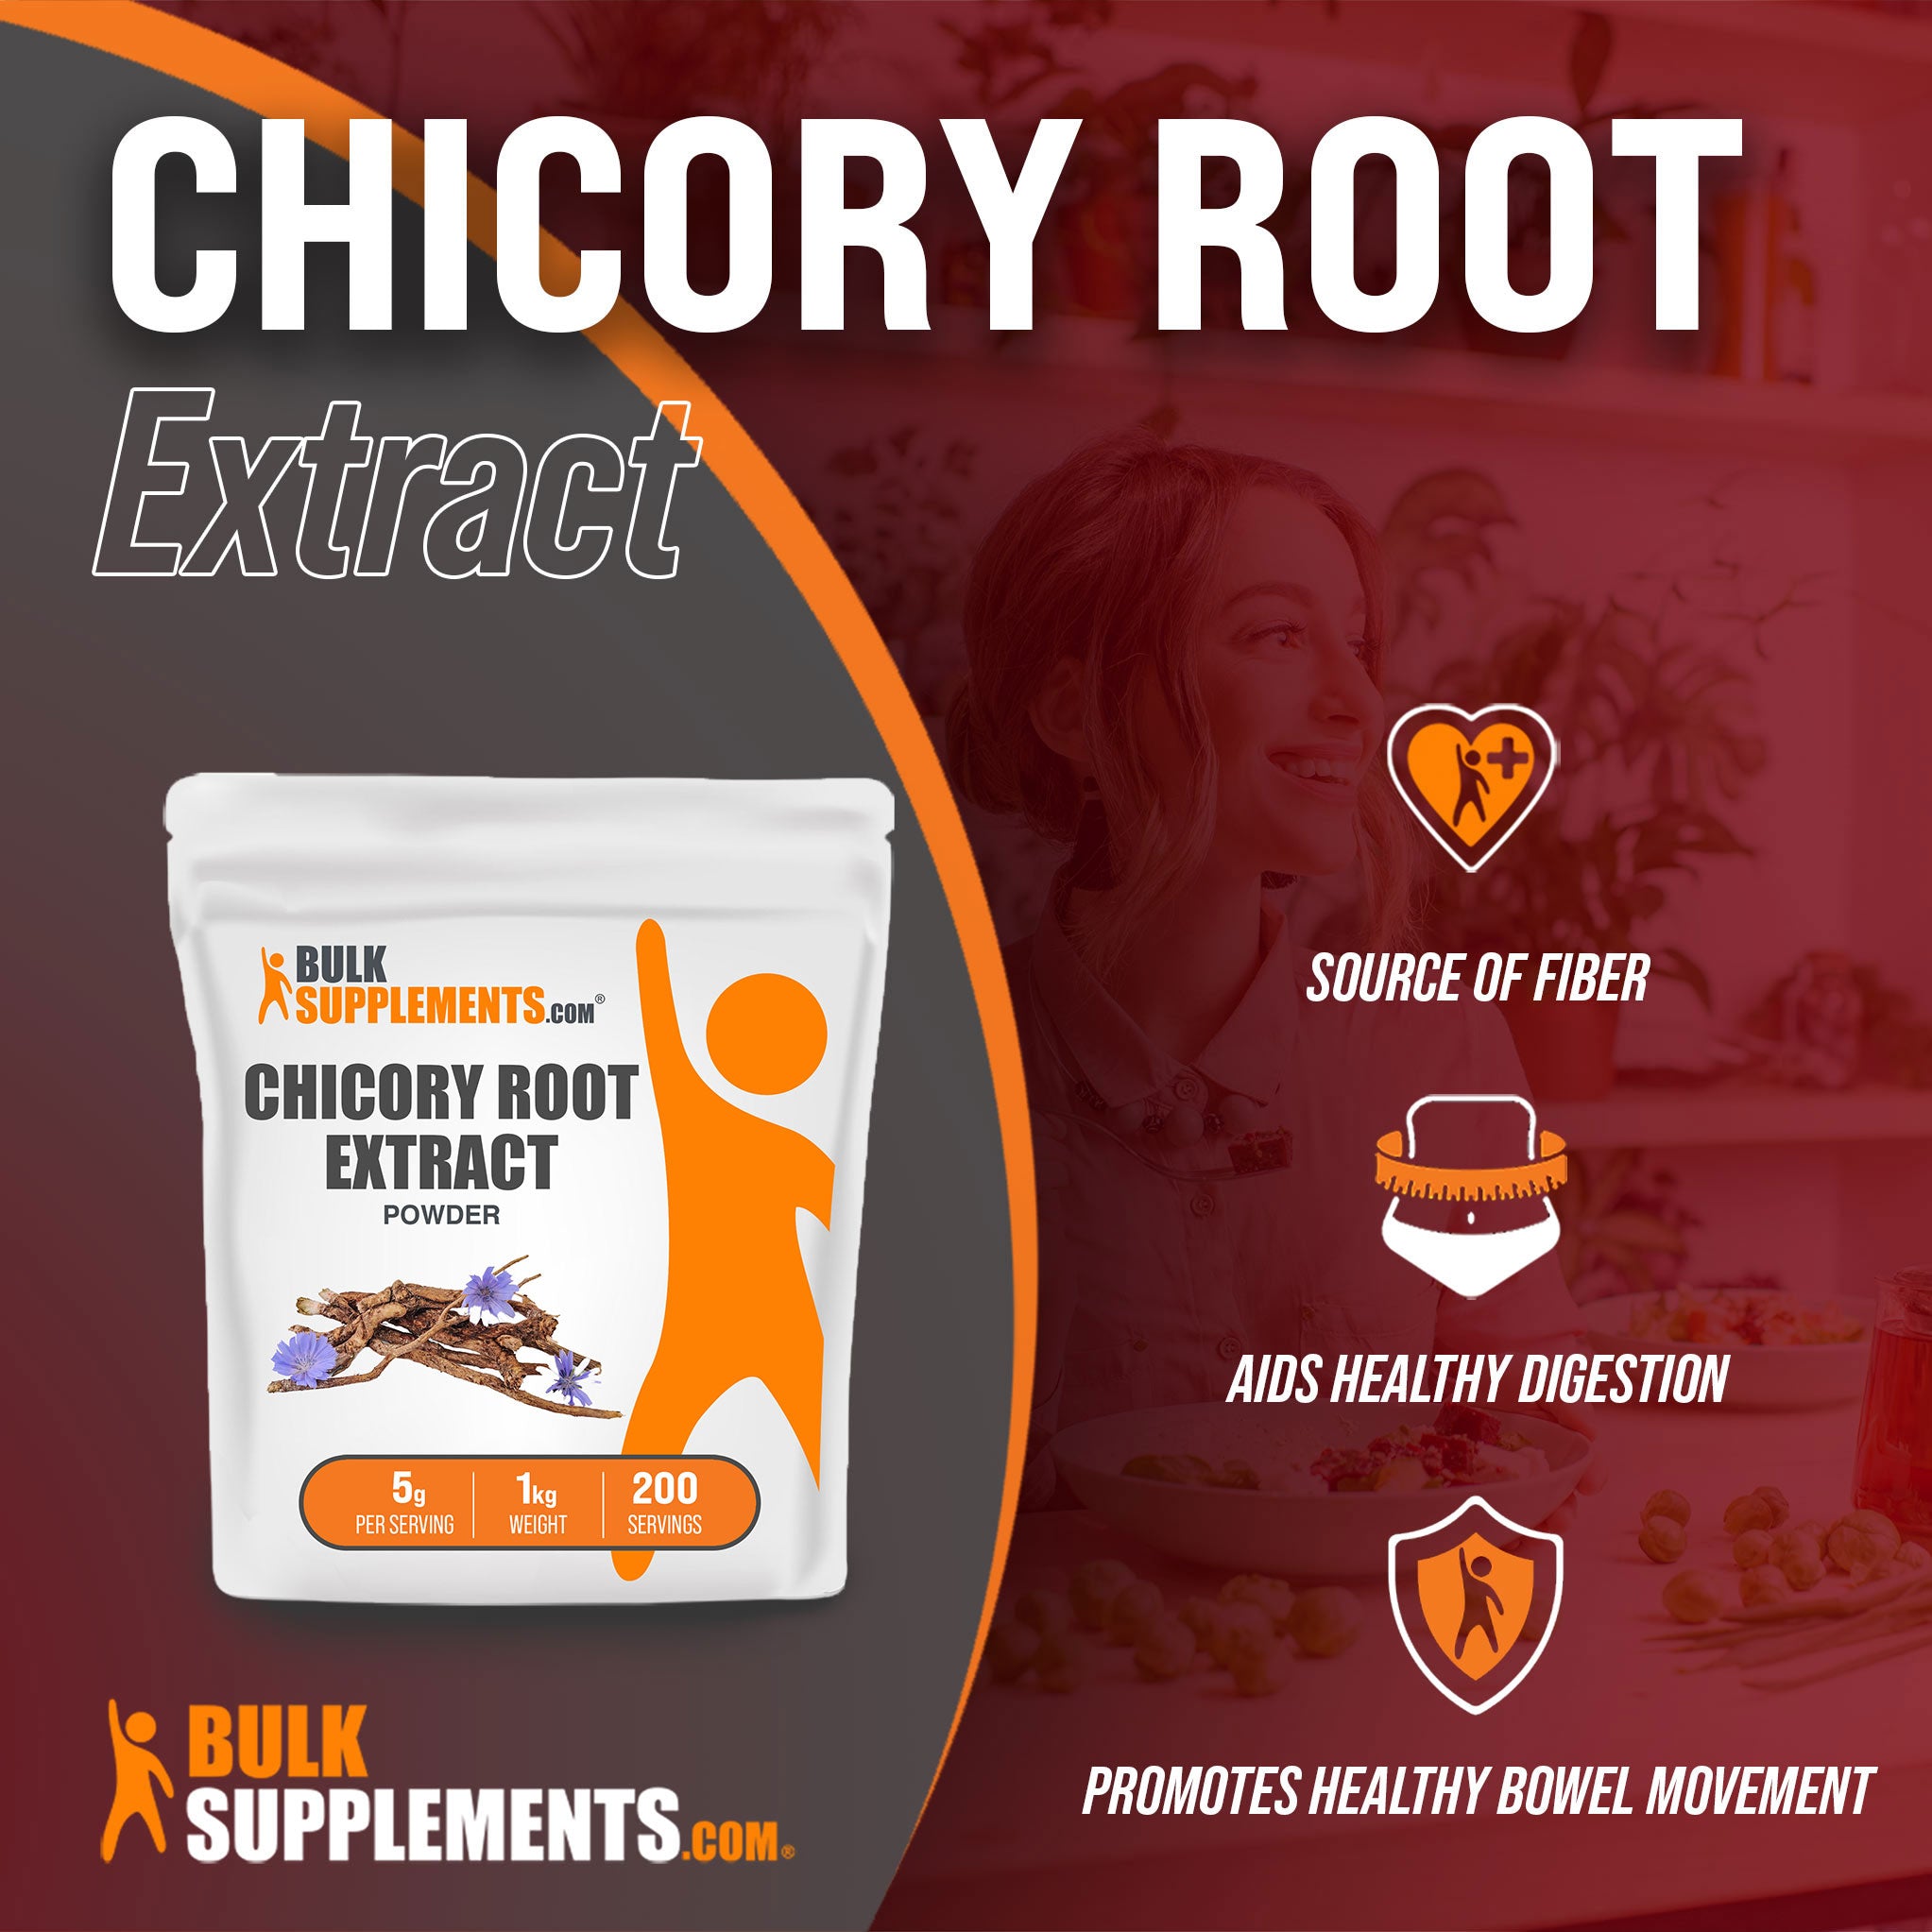 Benefits of 1kg Chicory Root Extract Powder; fiber supplement, aids healthy digestion, promotes healthy bowel movement